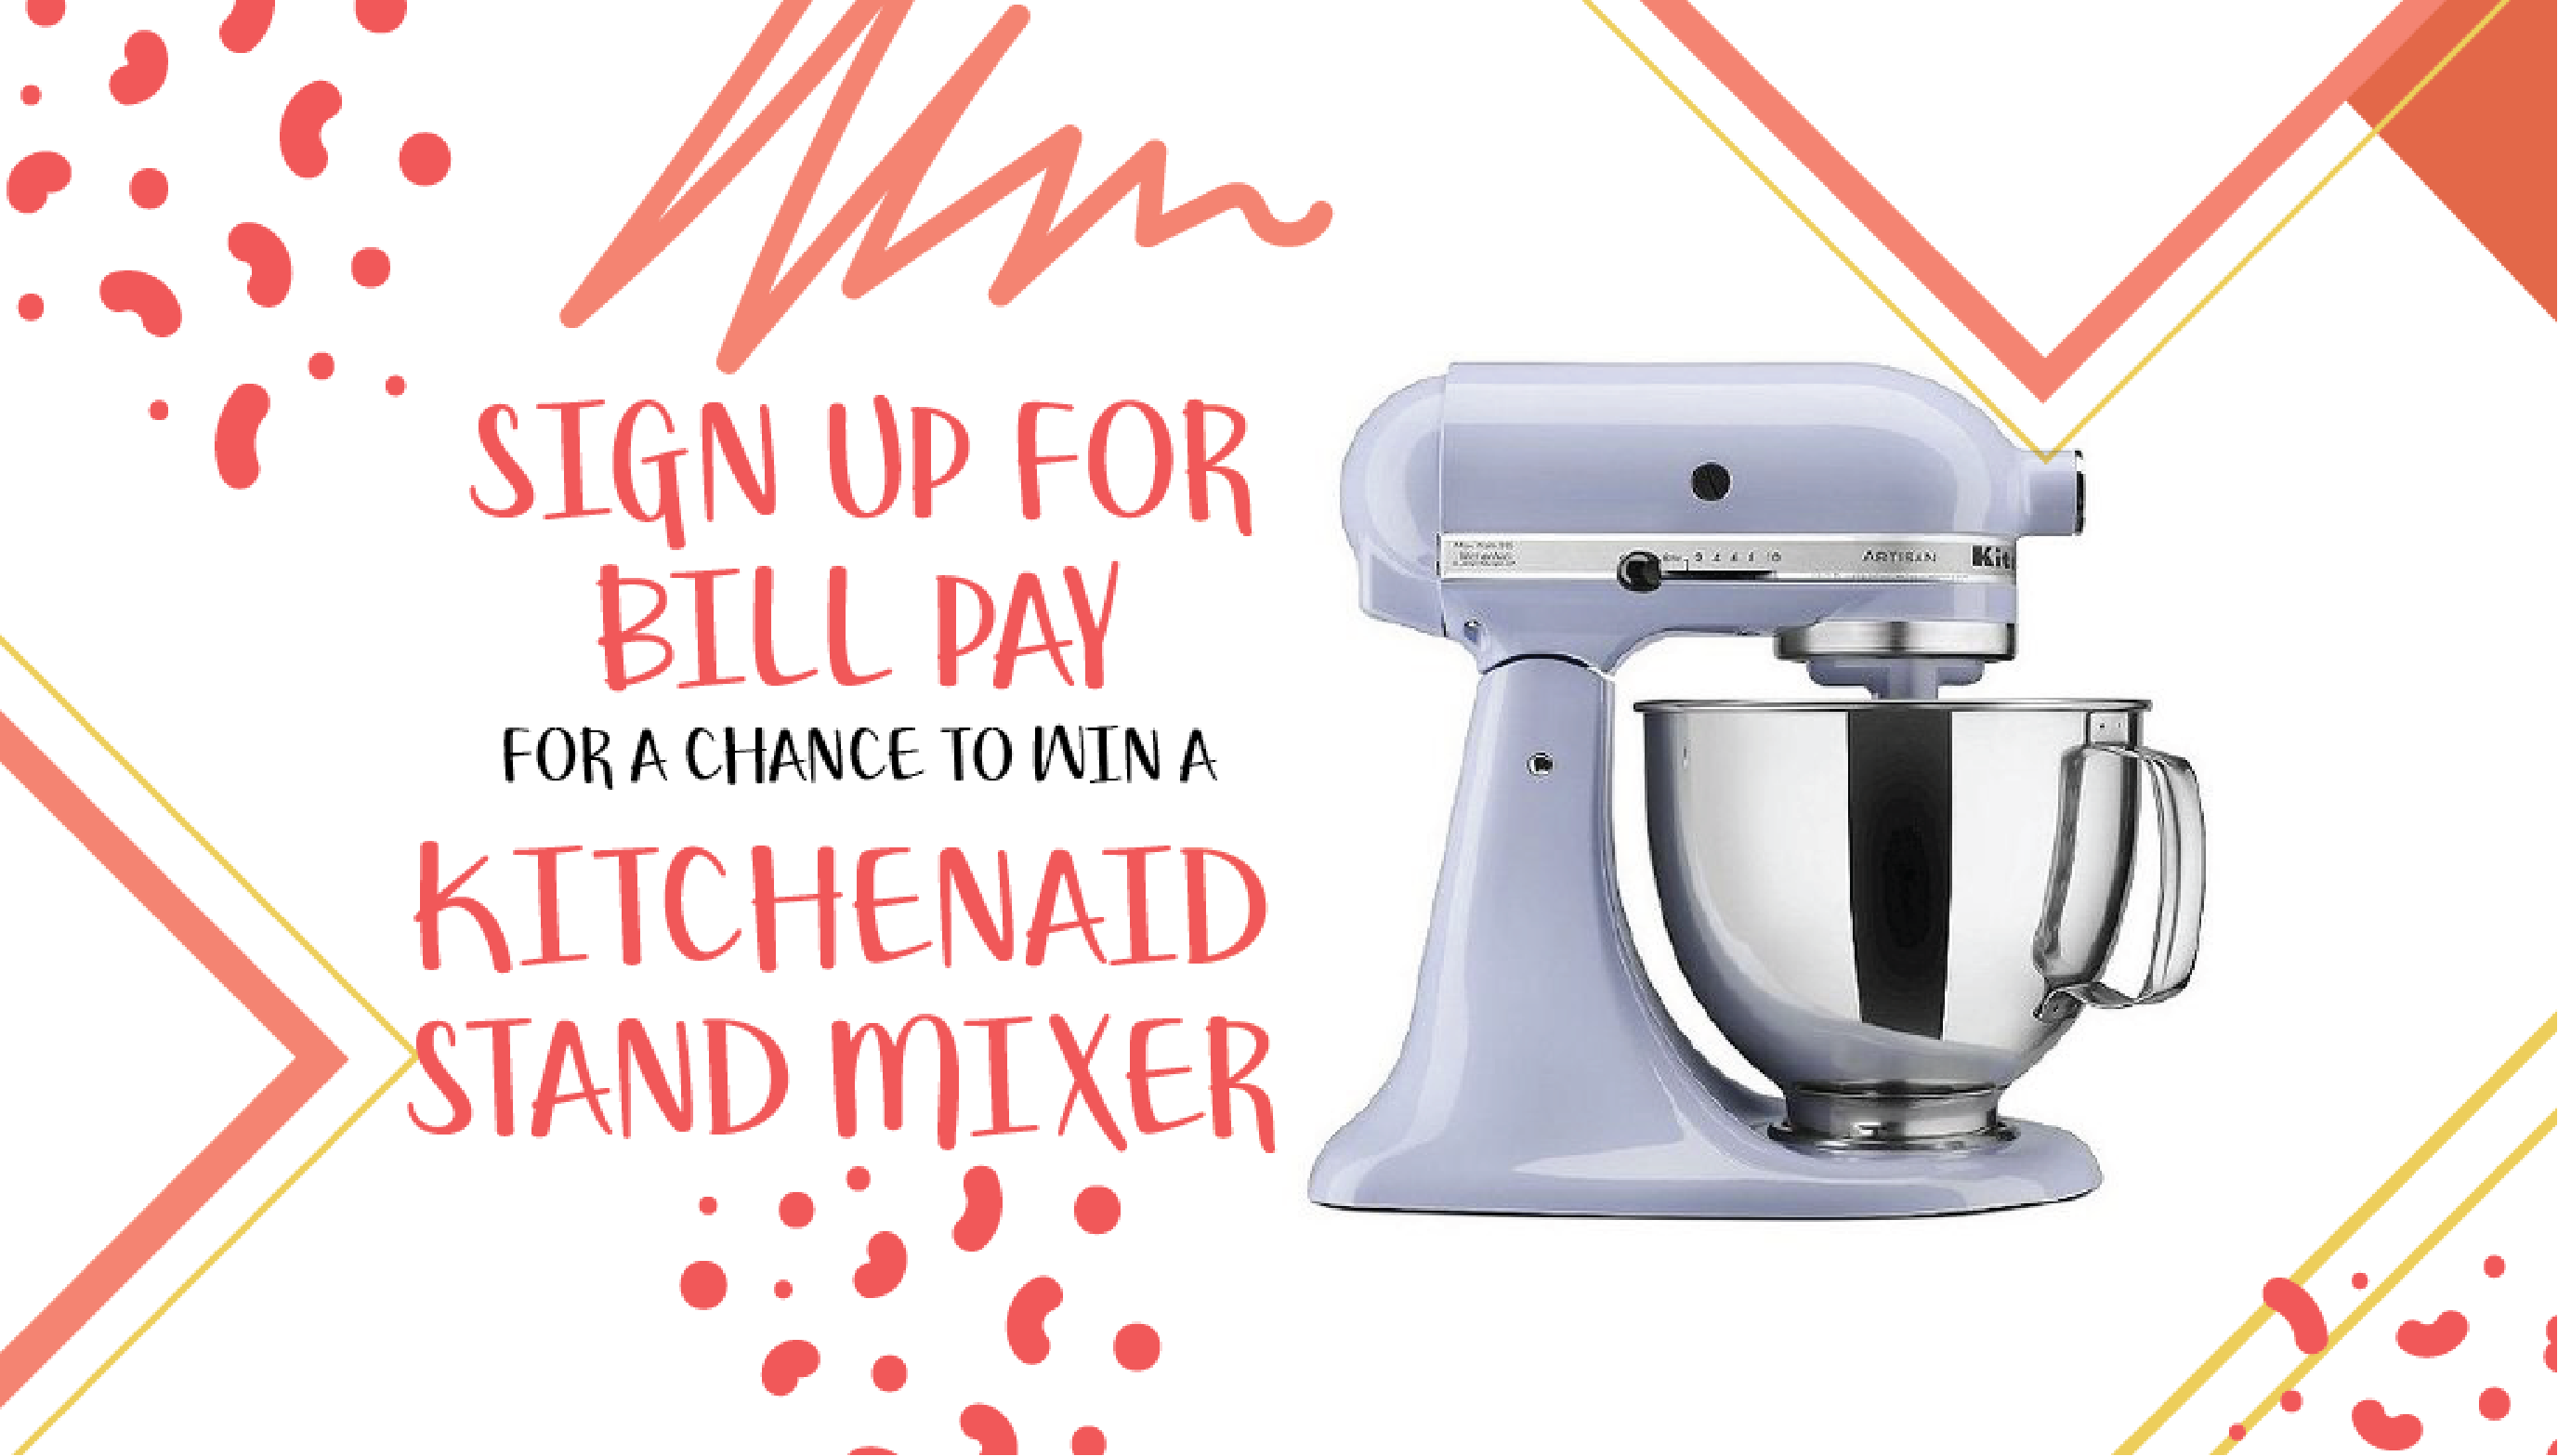 ENROLL IN BILL PAY FOR A CHANCE TO WIN KITCHEN AID STAND MIXER. 